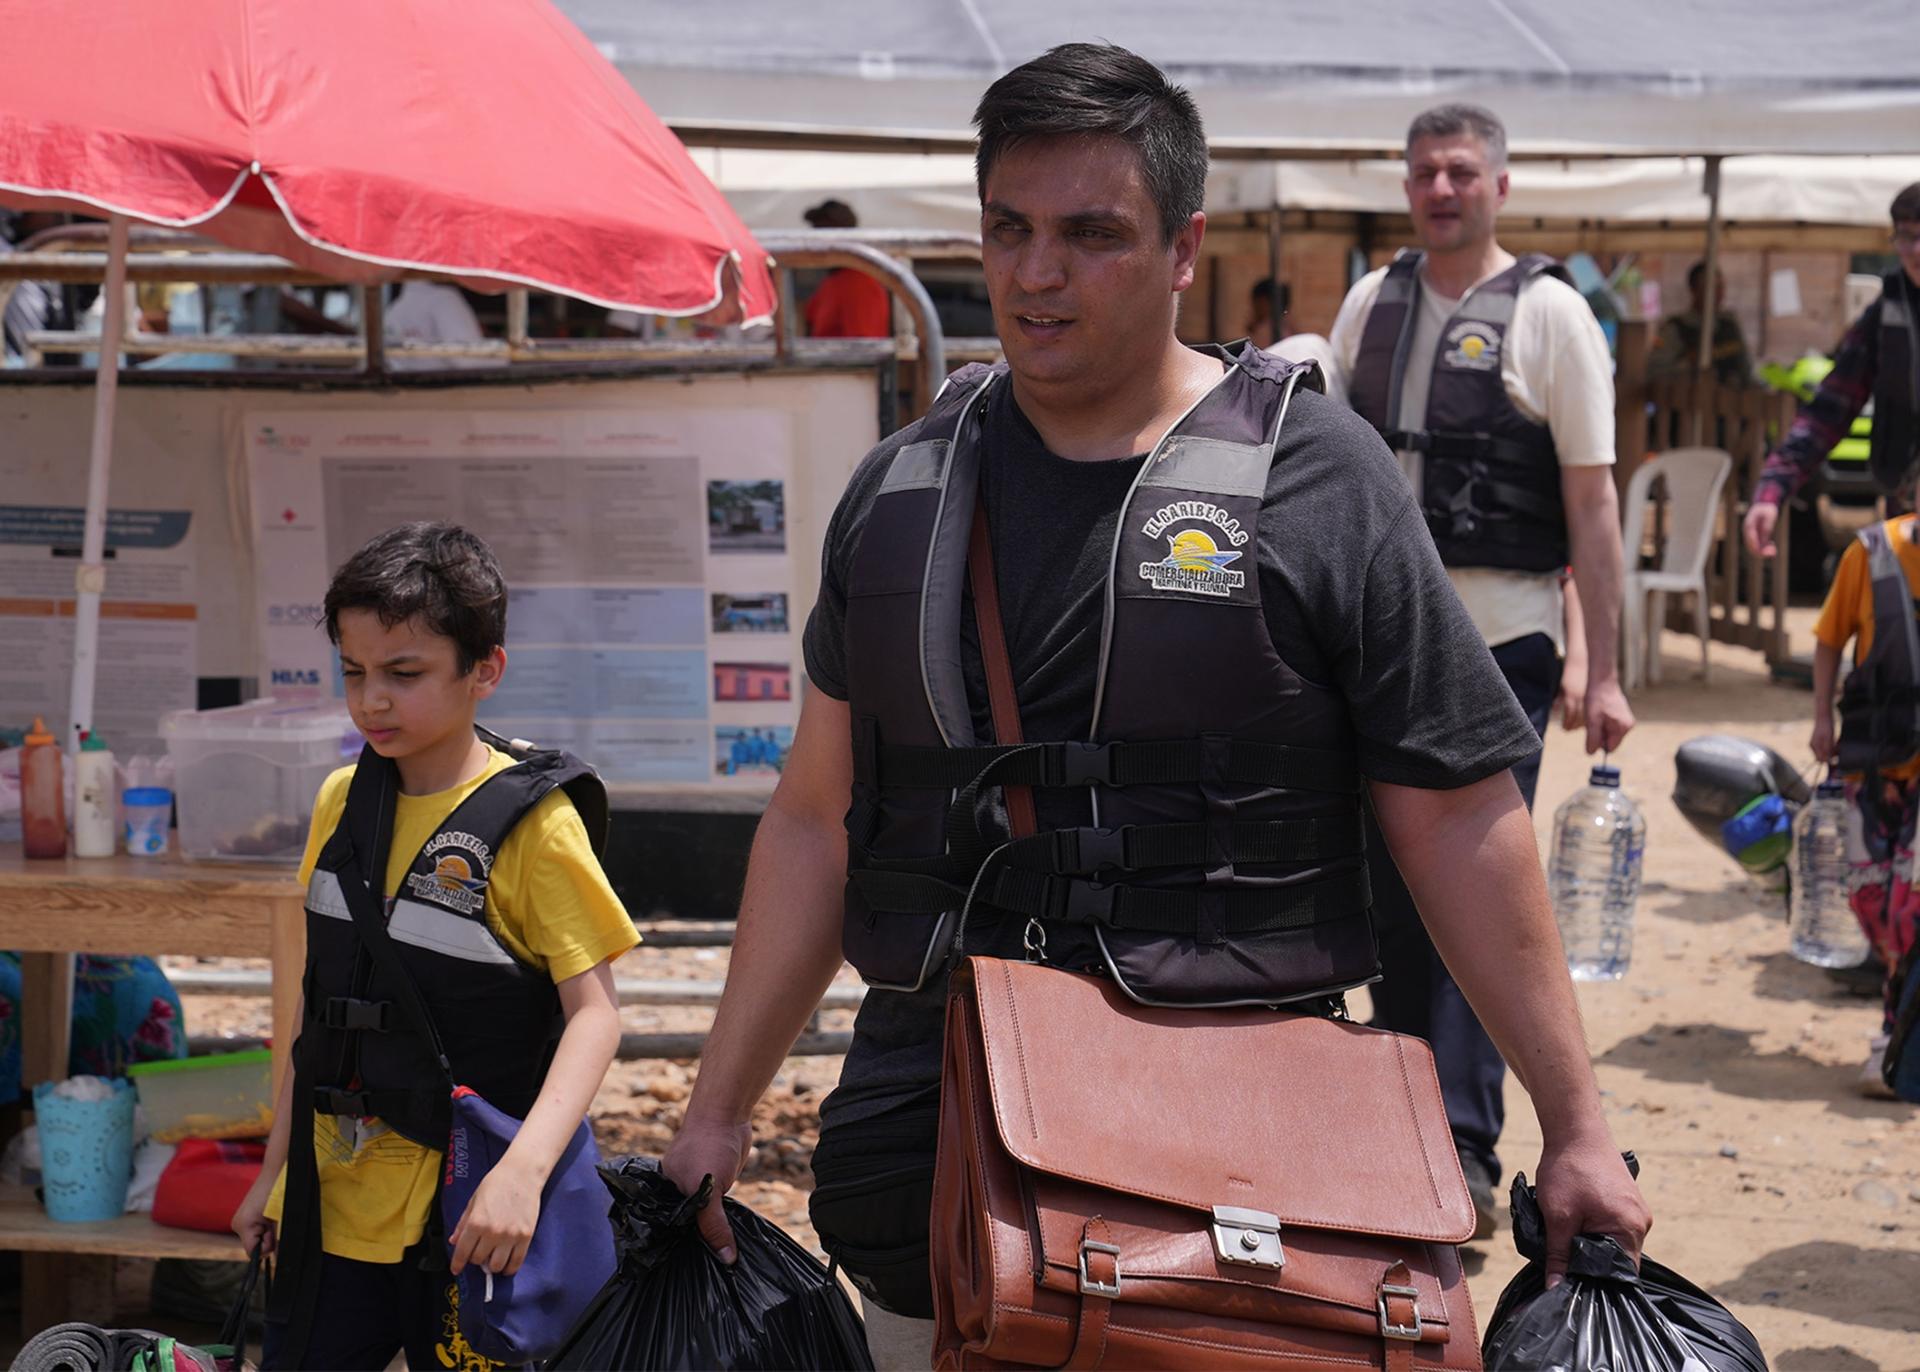 Abdul Bais, a former diplomat for Afghanistan, leads a group of migrant families. As he gets ready to board a speedboat in Necocli, Colombia, he carries his documents in a leather briefcase.